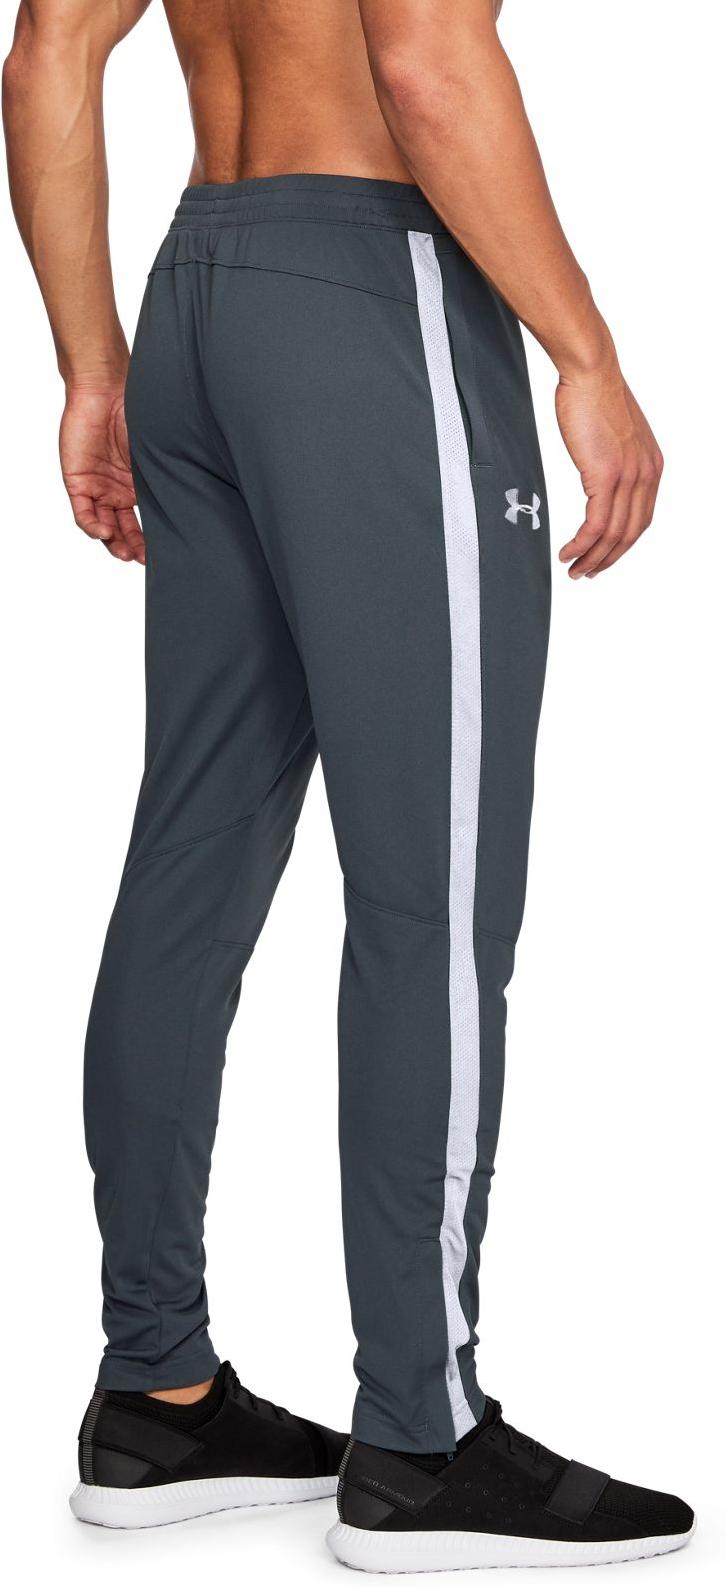 Under Armour Sports Style Pique Track Pant Men Sports Training Jogging Trousers 1313201 